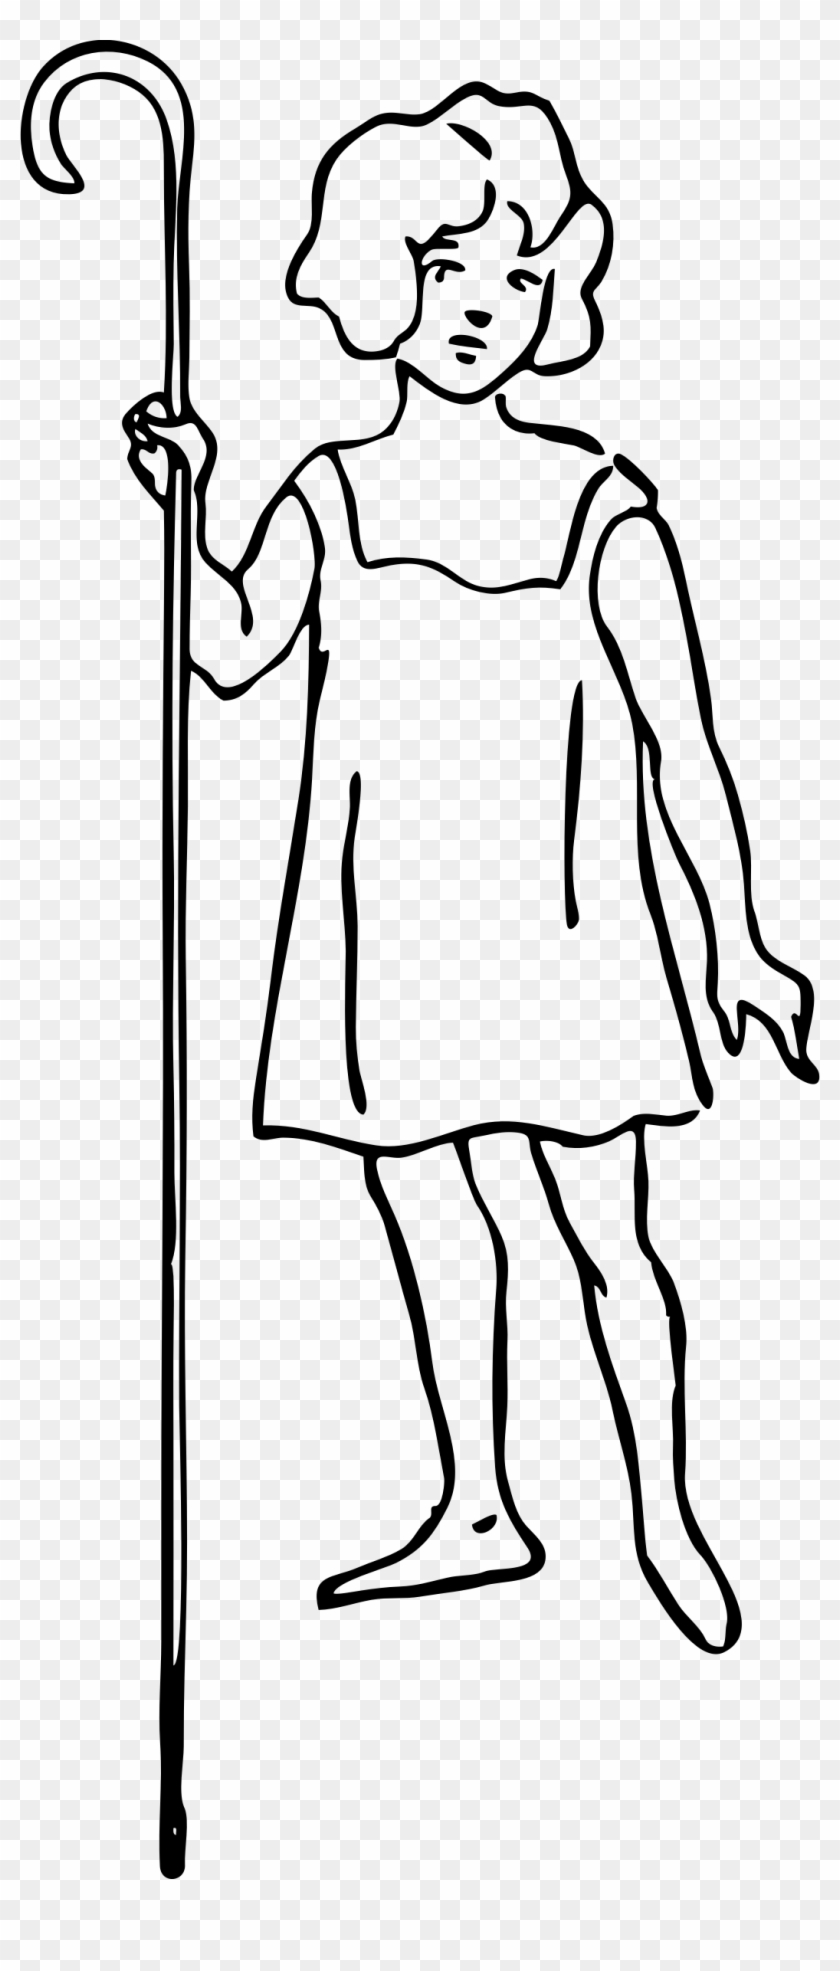 This Free Icons Png Design Of Shepherd Girl - Shepherd Girl Clipart Transparent Png